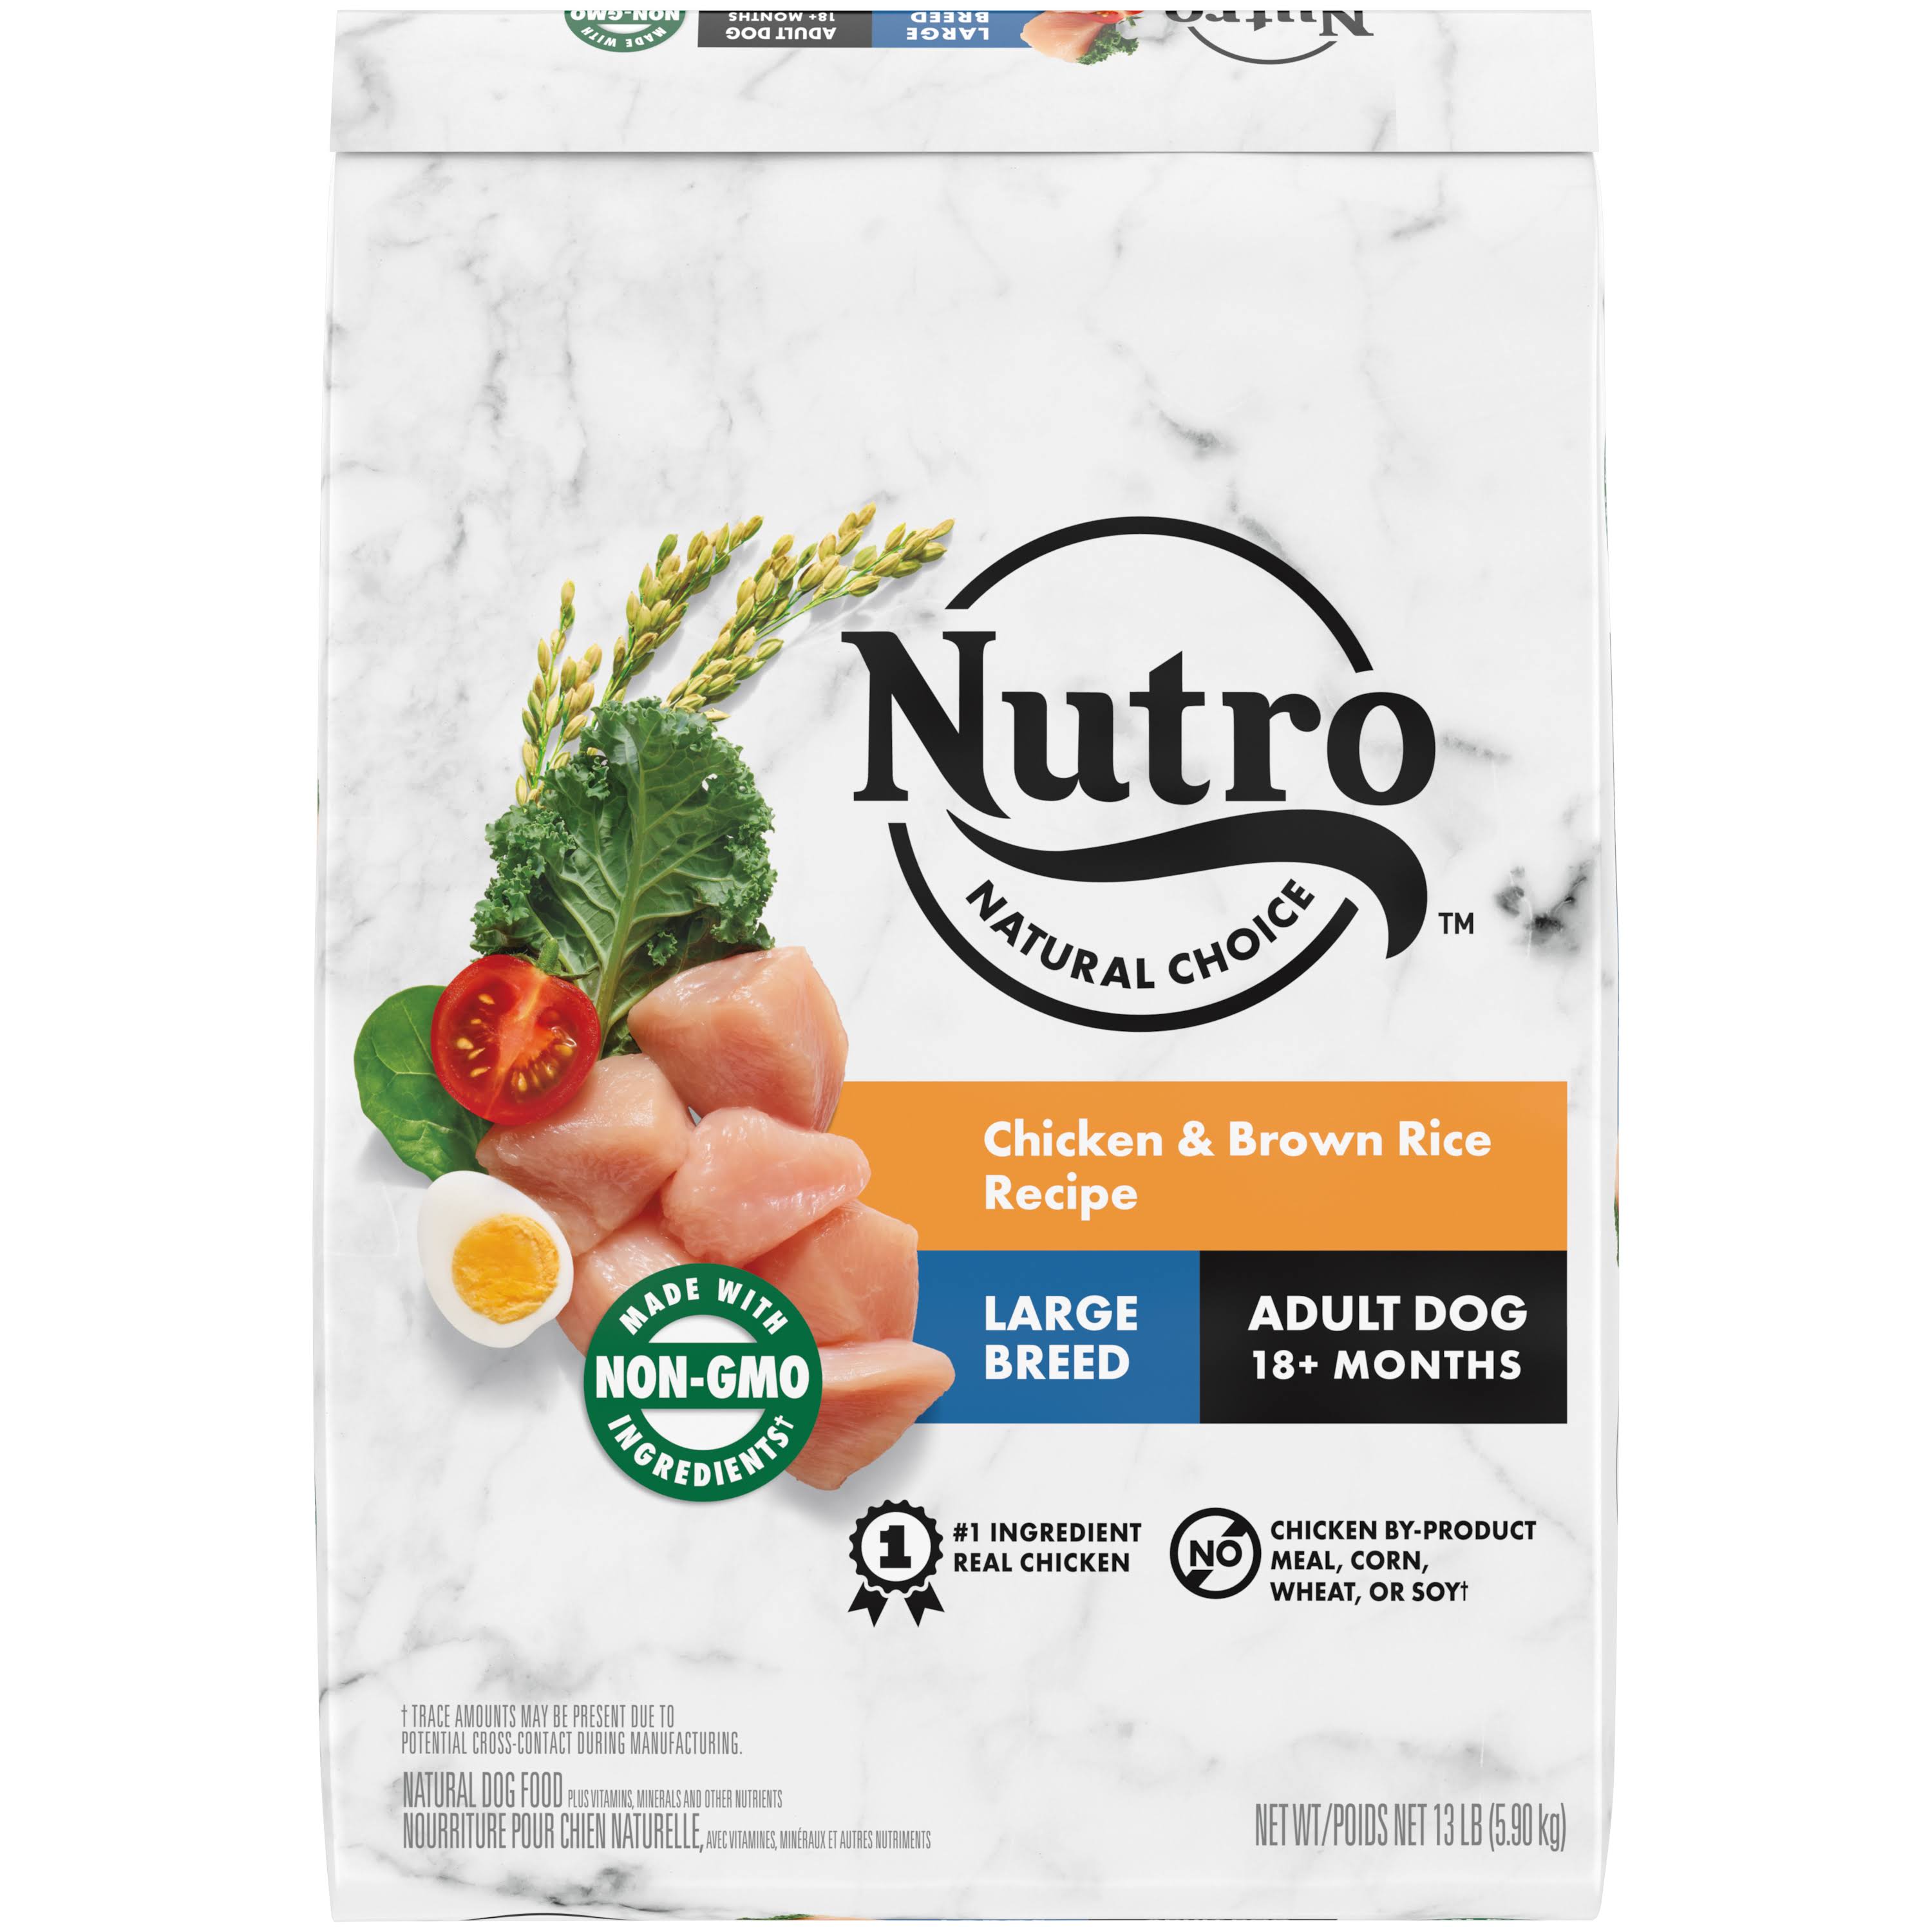 Nutro Natural Choice Dog Food, Natural, Chicken & Brown Rice Recipe, Large Breed, Adult - 13 lb